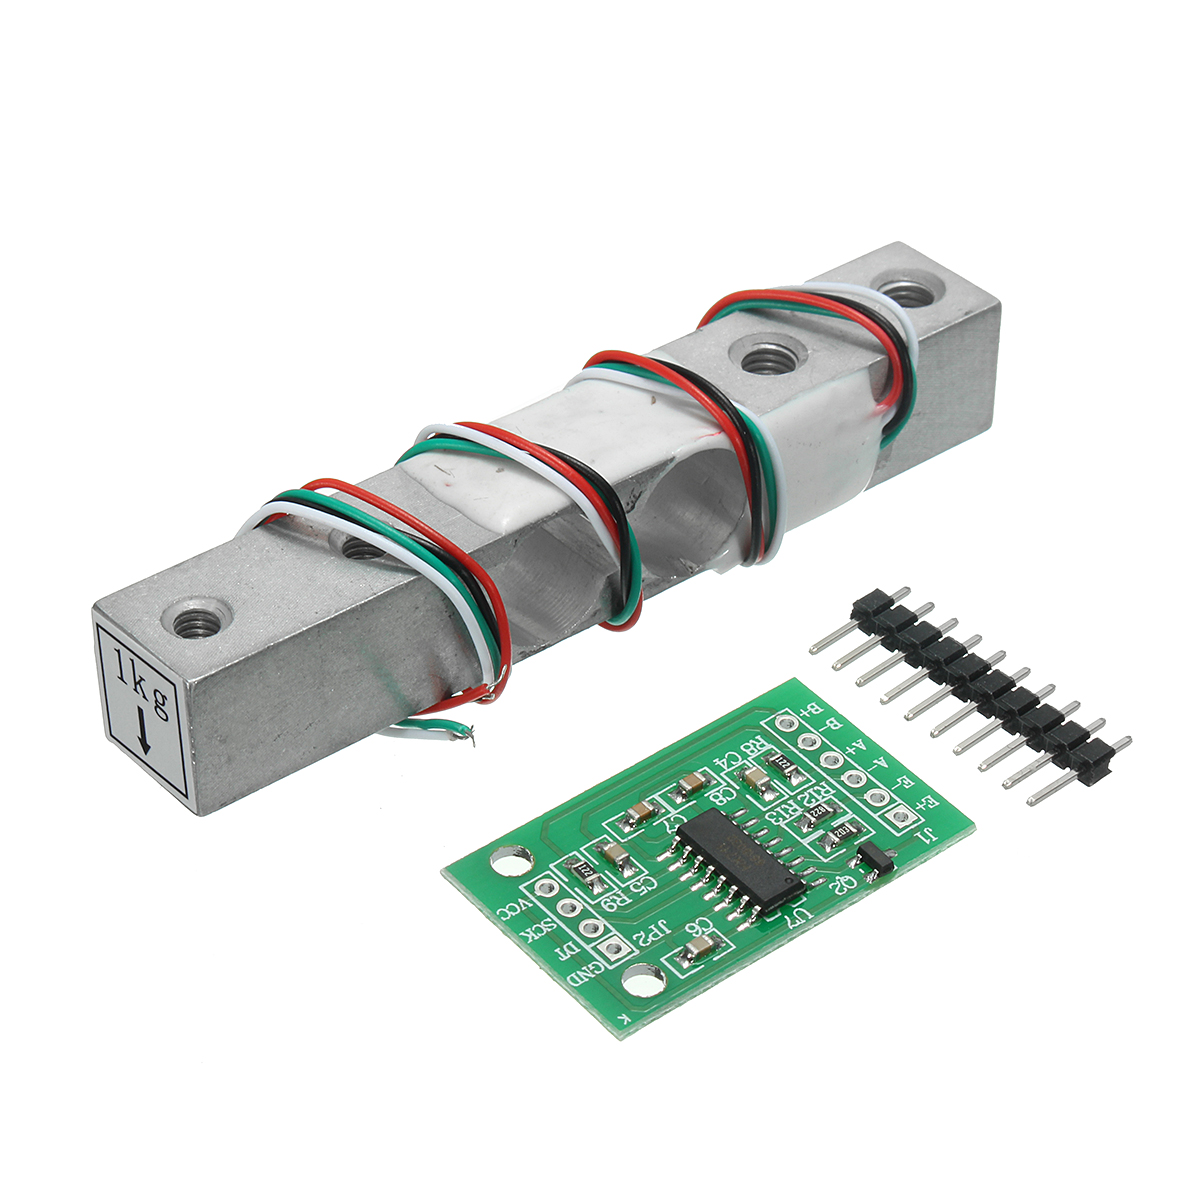 

3pcs HX711 24bit AD Module + 1kg Aluminum Alloy Scale Weighing Sensor Load Cell Kit For Arduino